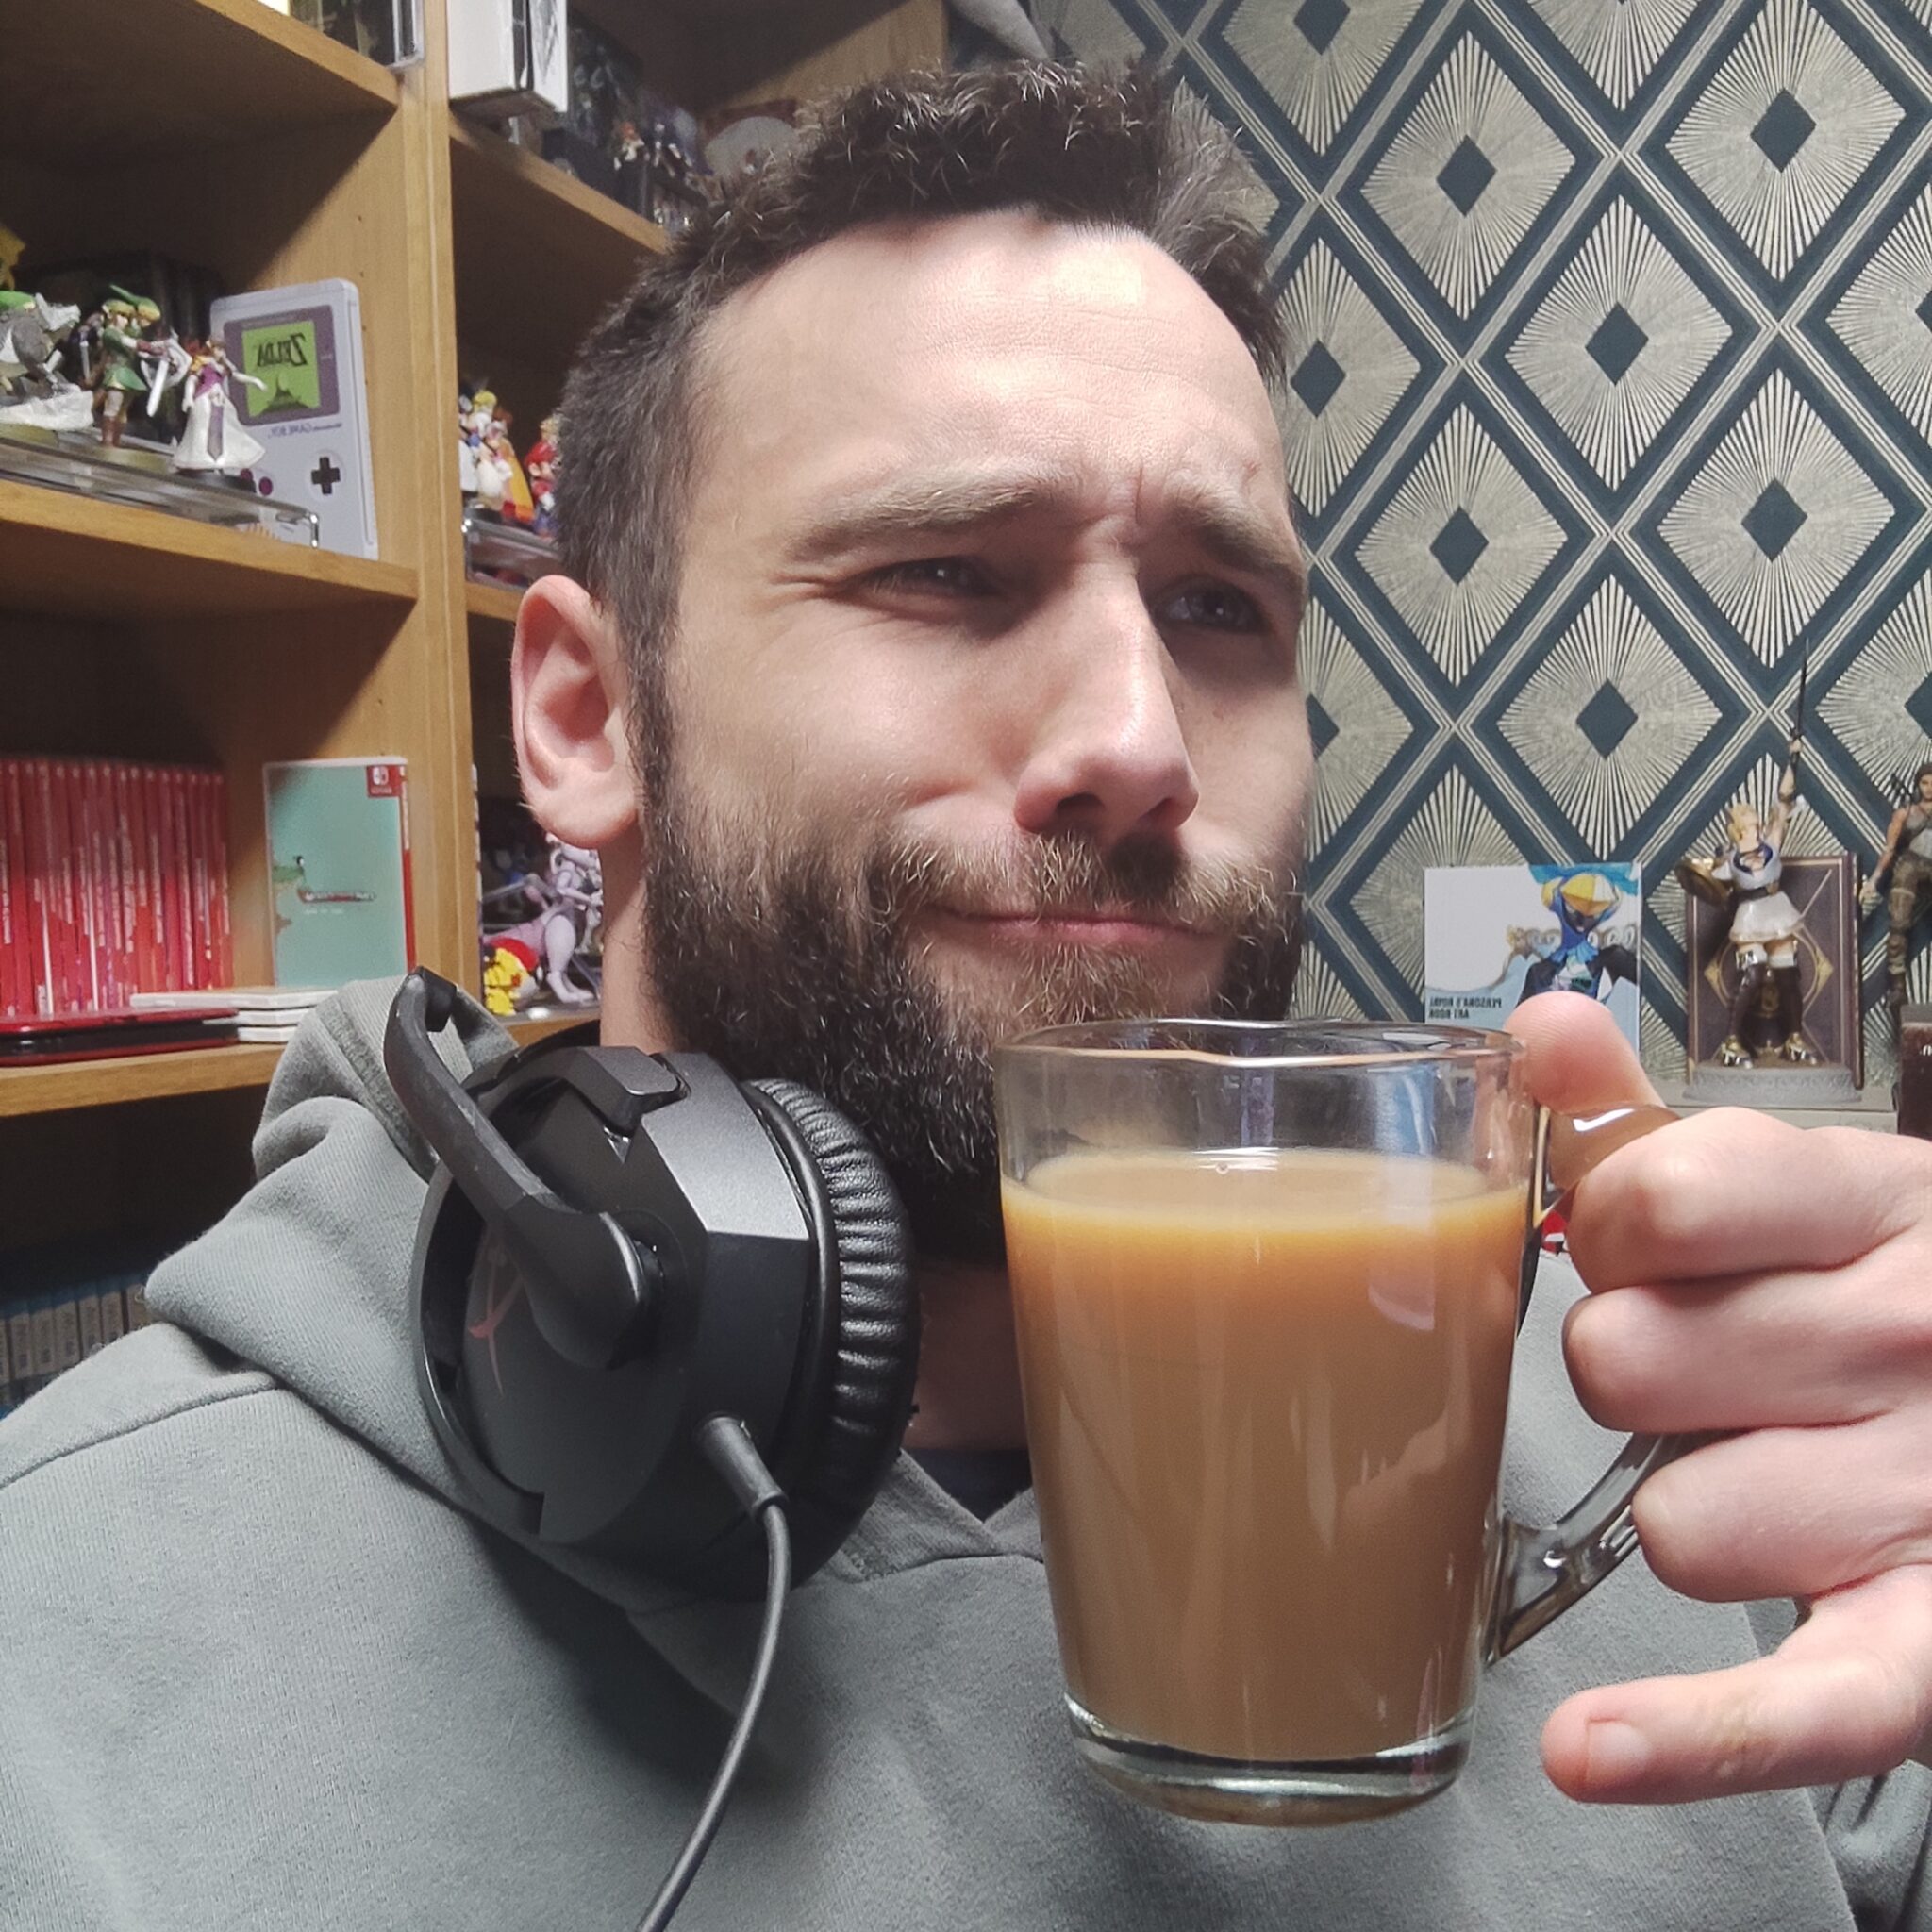 Selfie of PixelManta holding a cup of coffee